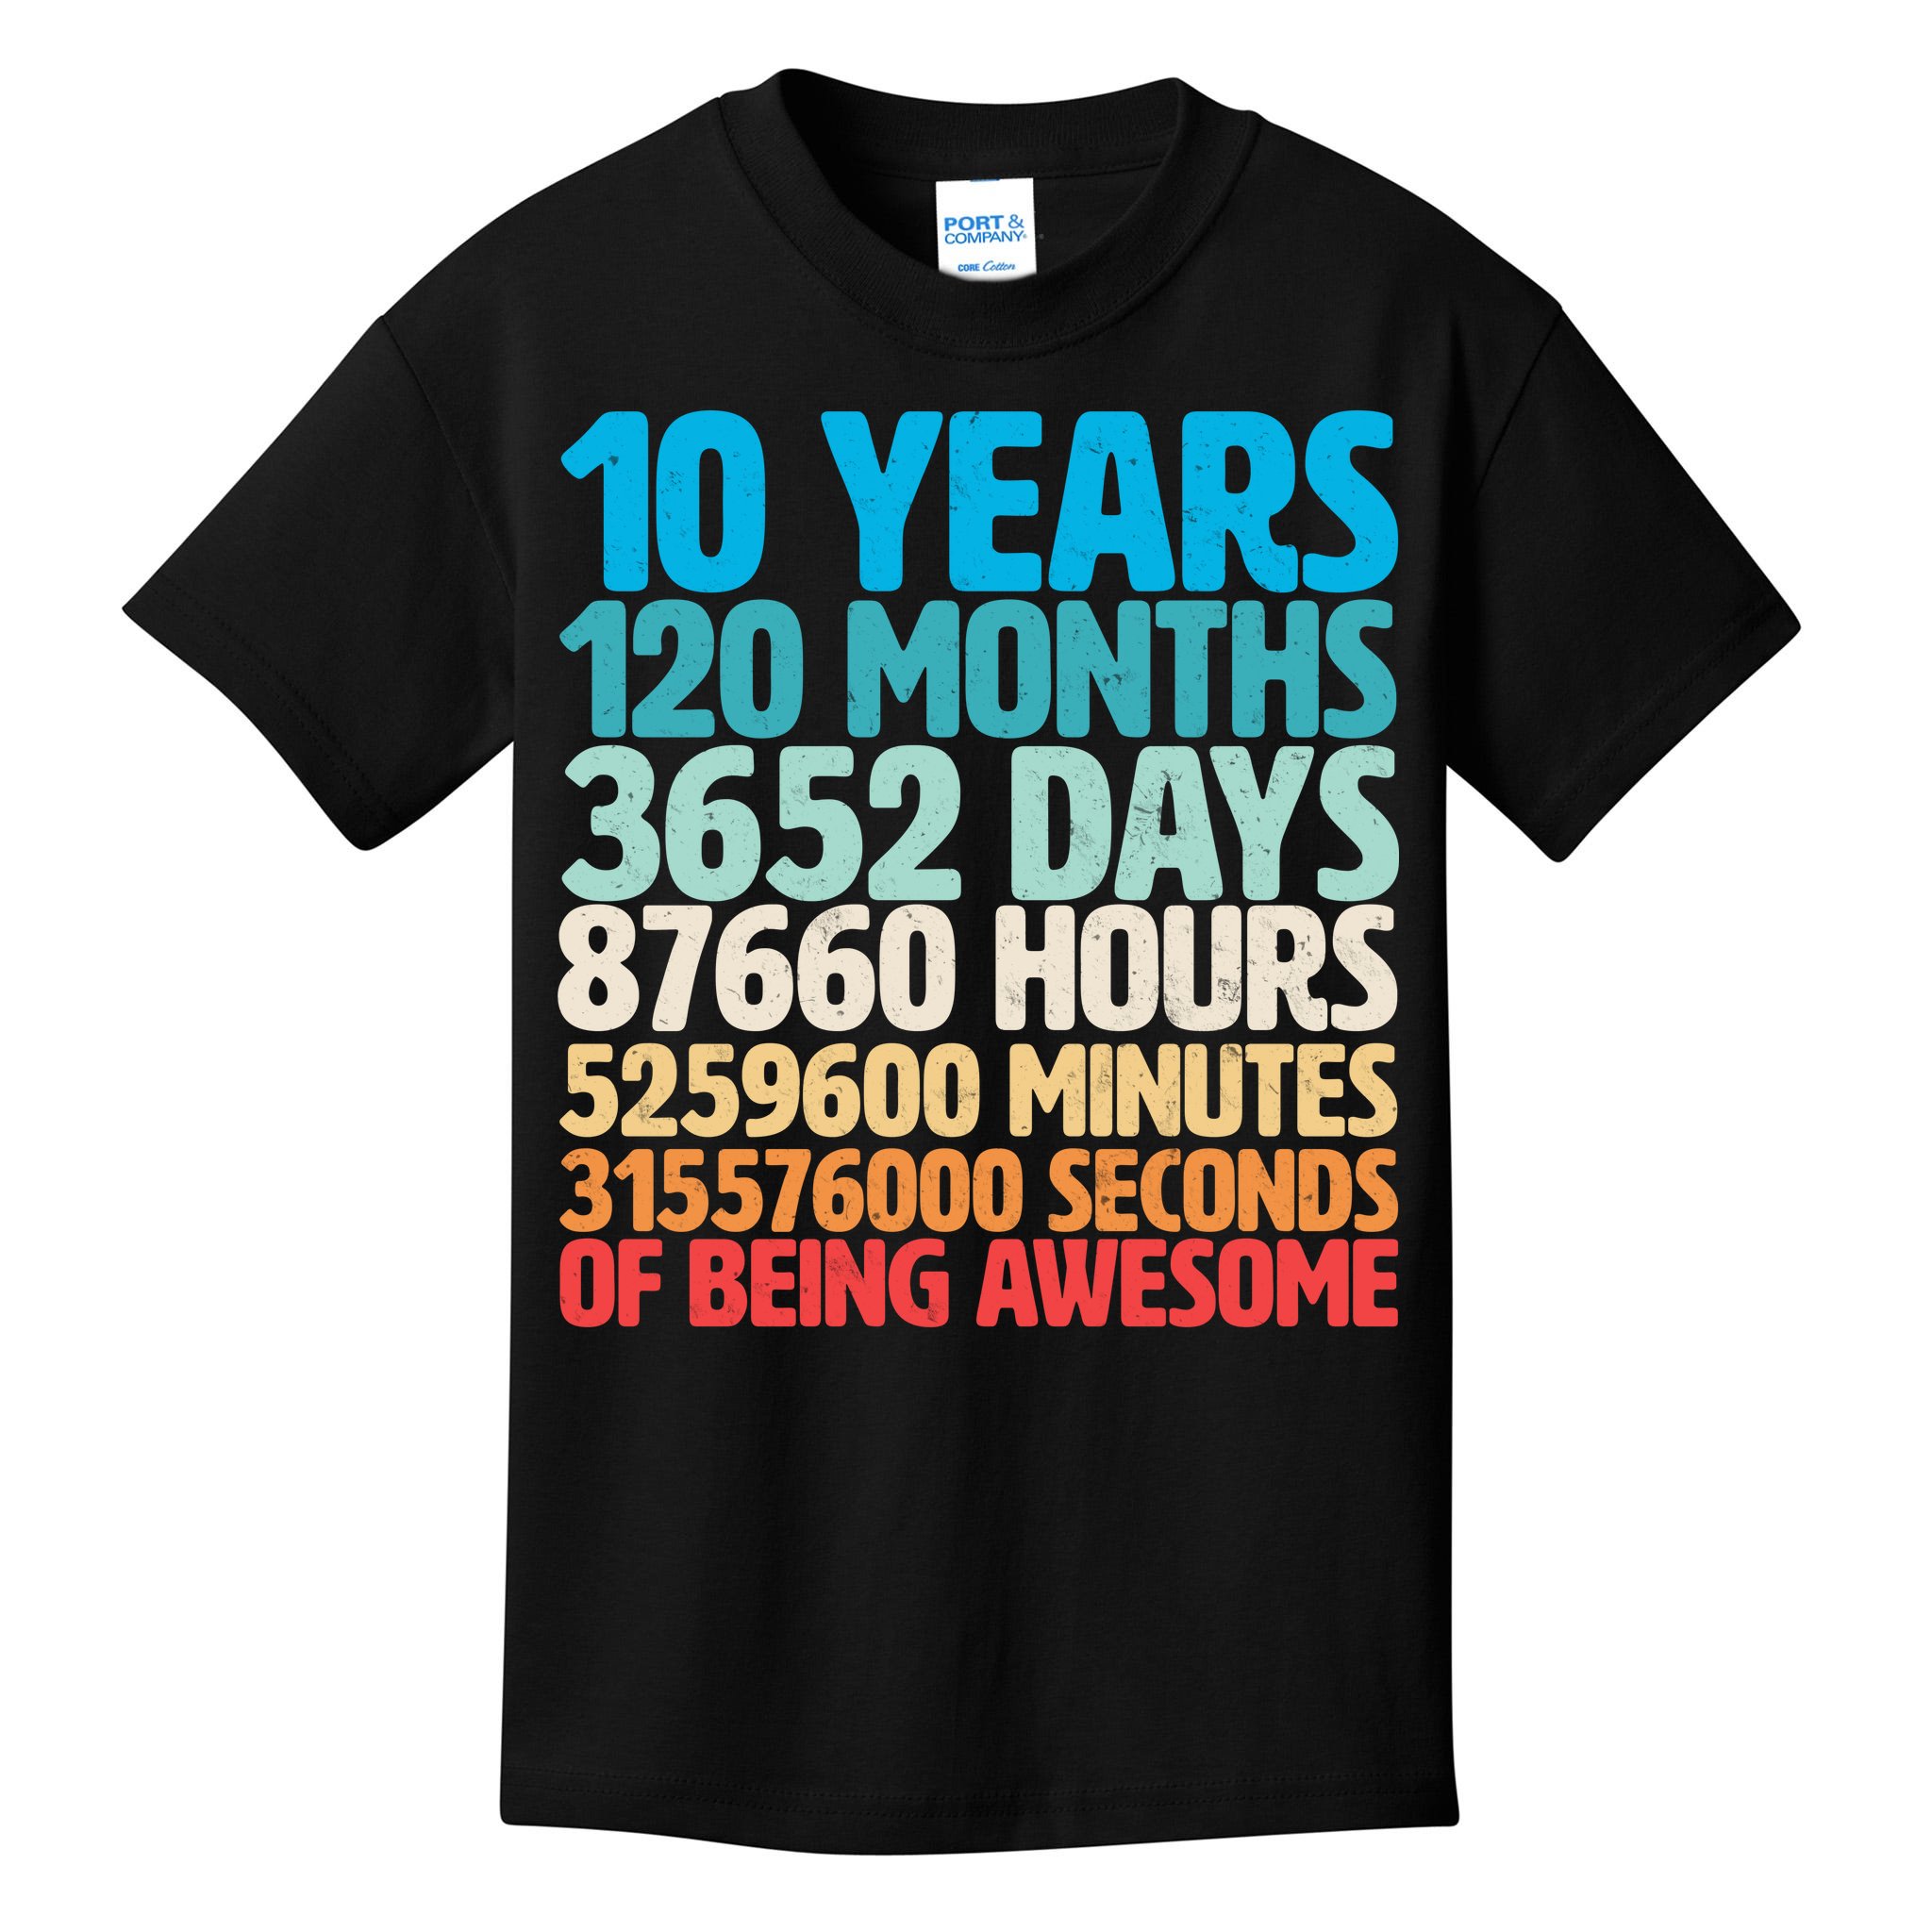 Birthday Shirt for 10 Year Old Boy Ten Year Old Birthday Shirt 10 Ten Years Of Awesome Kleding Jongenskleding Tops & T-shirts T-shirts T-shirts met print 10 Years of Being Awesome Shirt 